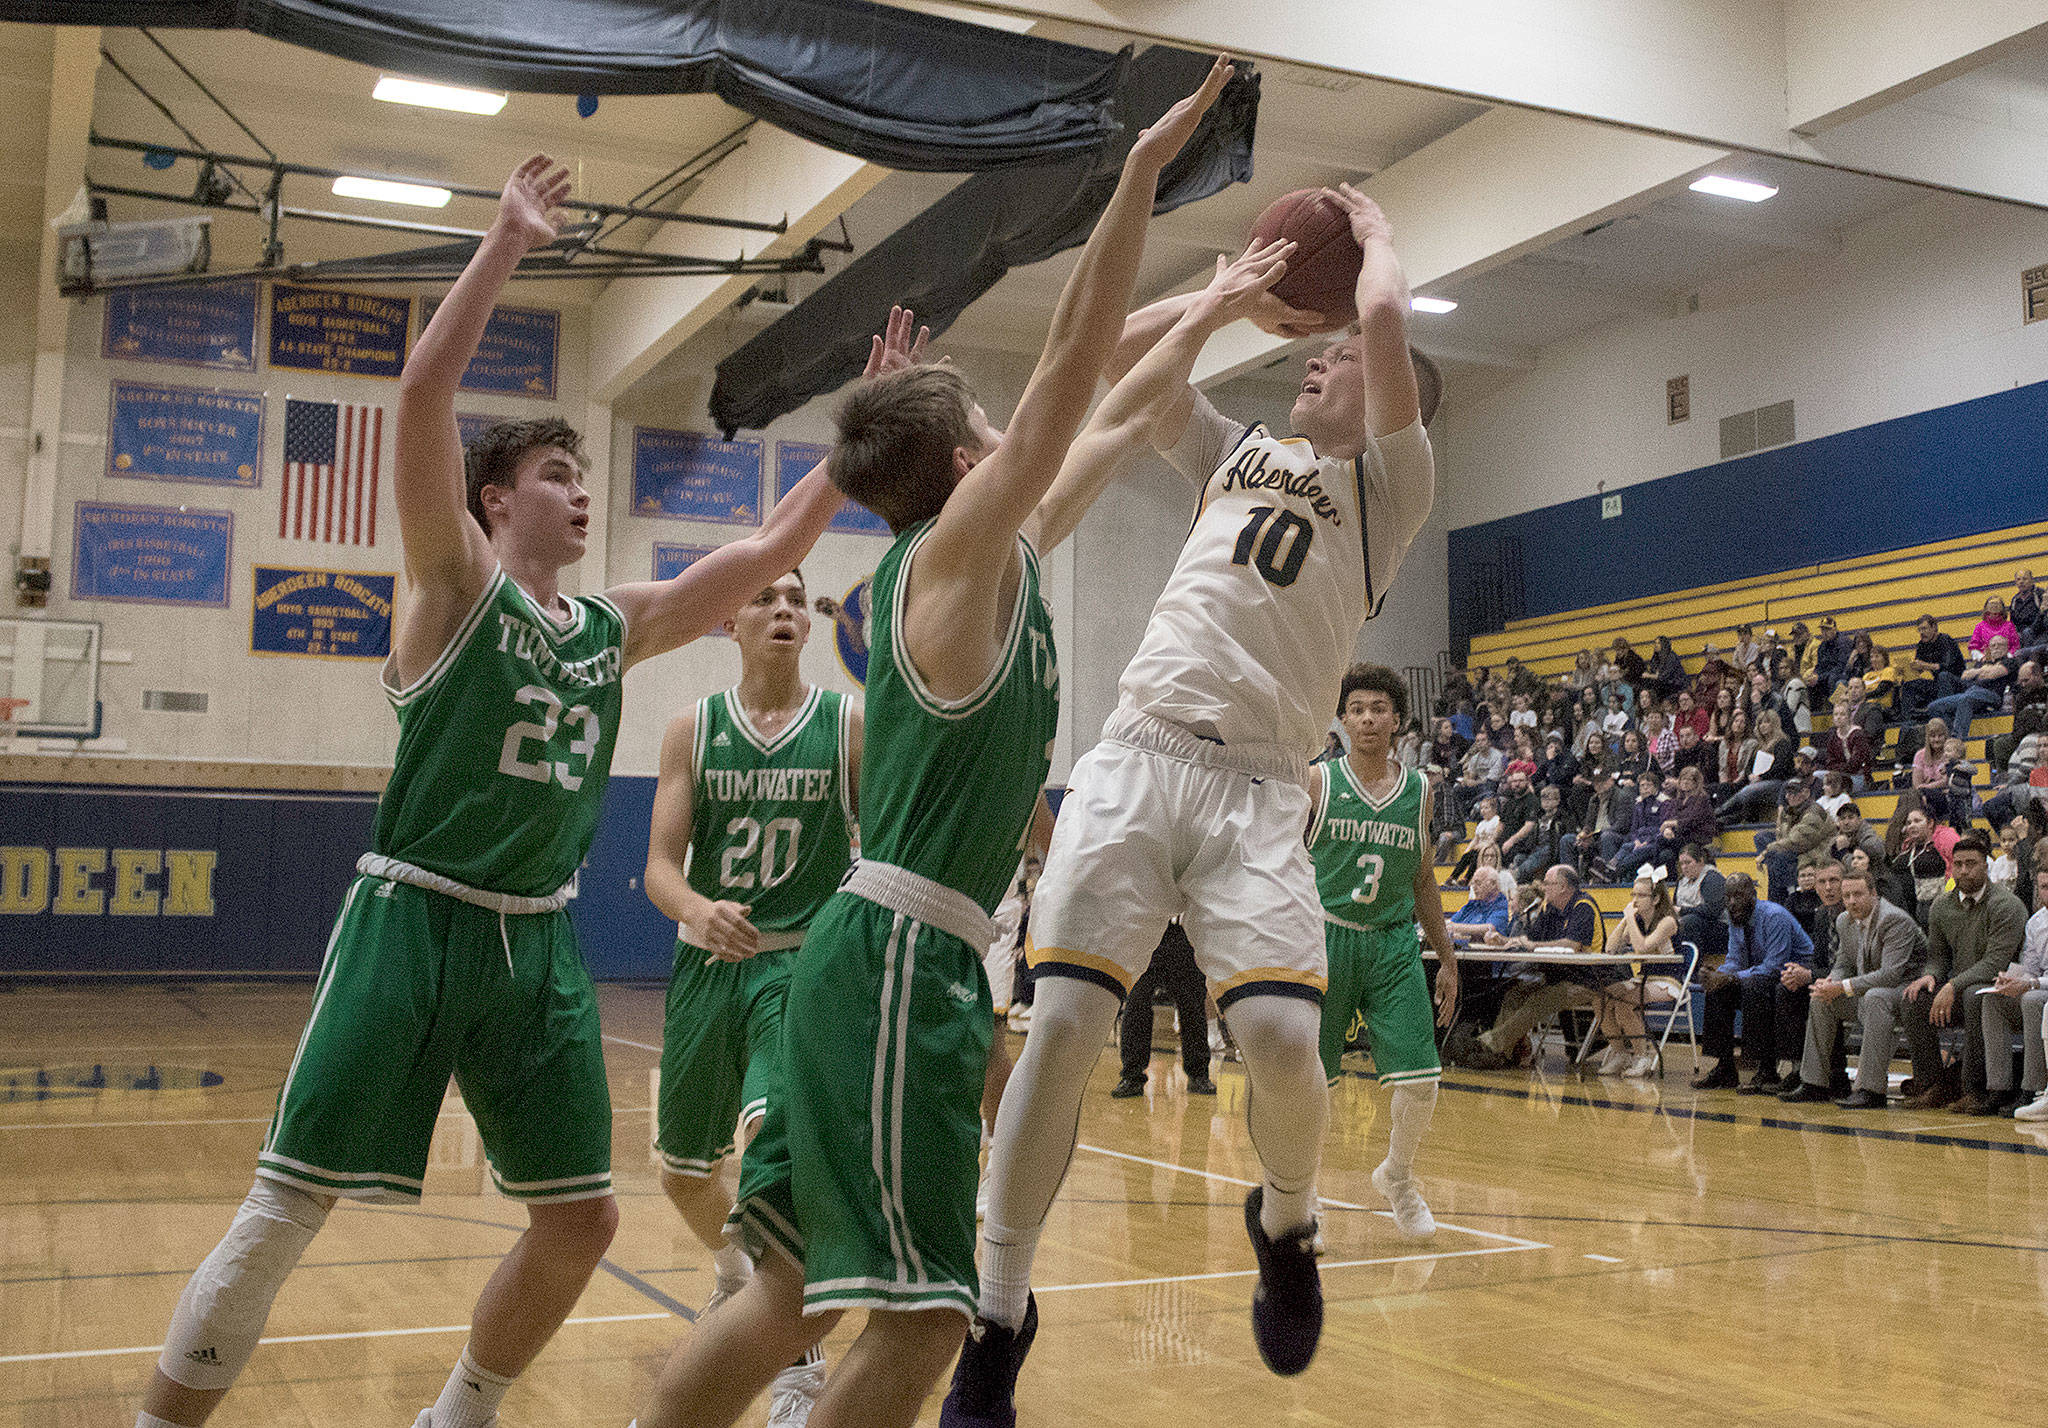 Aberdeen’s Ben Dublanko puts up a shot over two Tumwater defenders during an Evergreen 2A contest at Sam Benn Gym on Friday night. Dublanko led the Bobcats with 21 points in a 71-53 loss to the Thunderbirds. (Brendan Carl Photography)